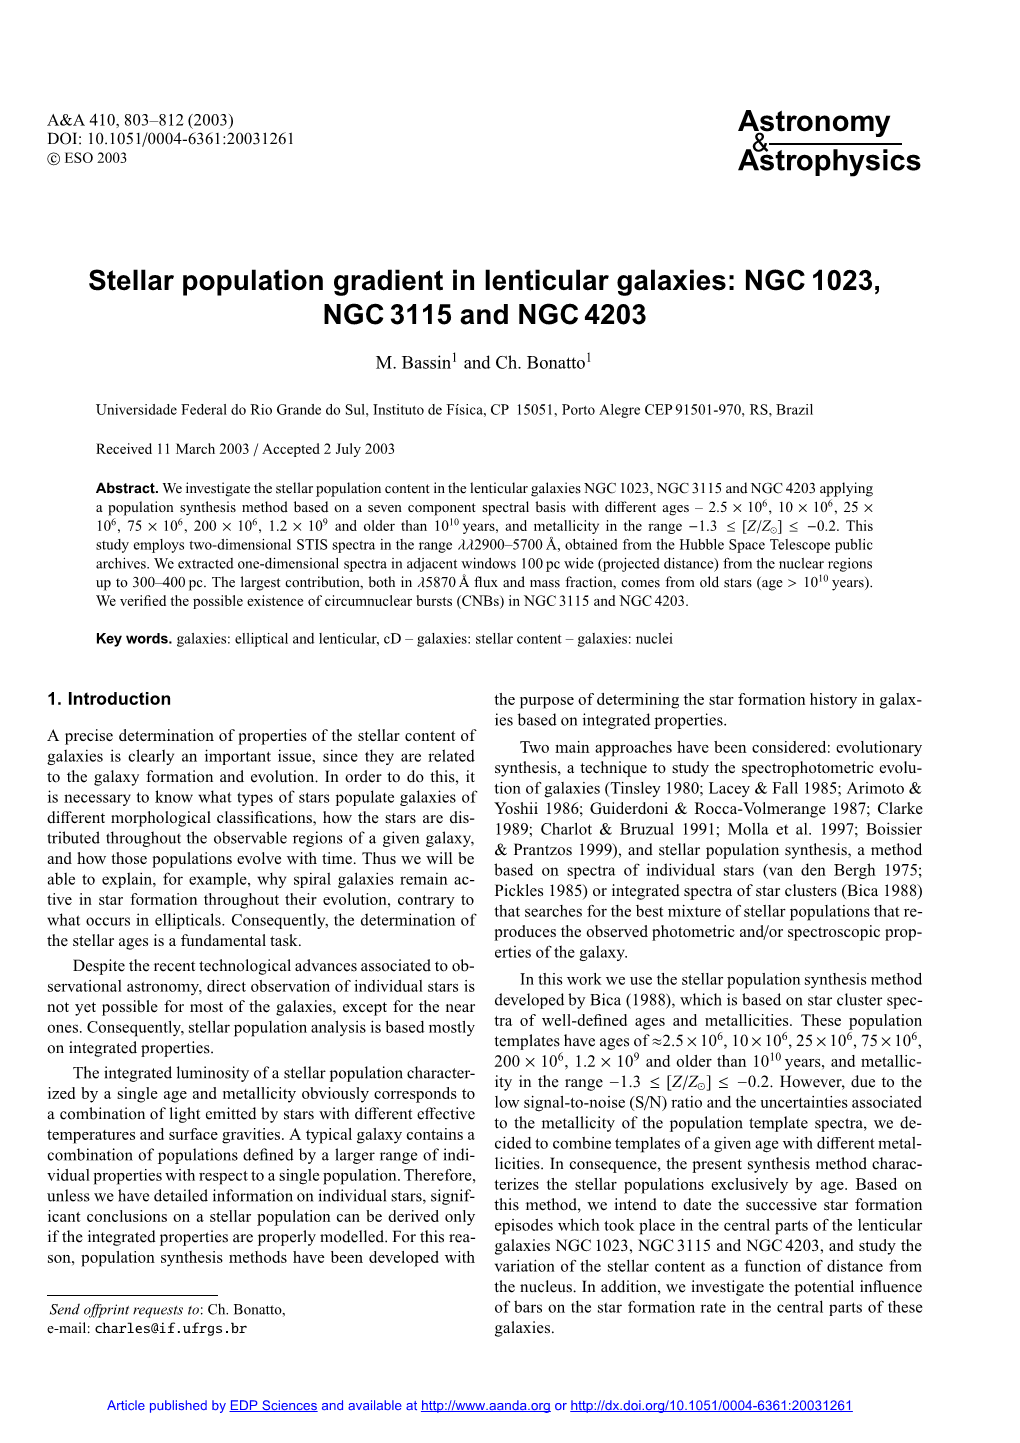 Stellar Population Gradient in Lenticular Galaxies: NGC 1023, NGC 3115 and NGC 4203